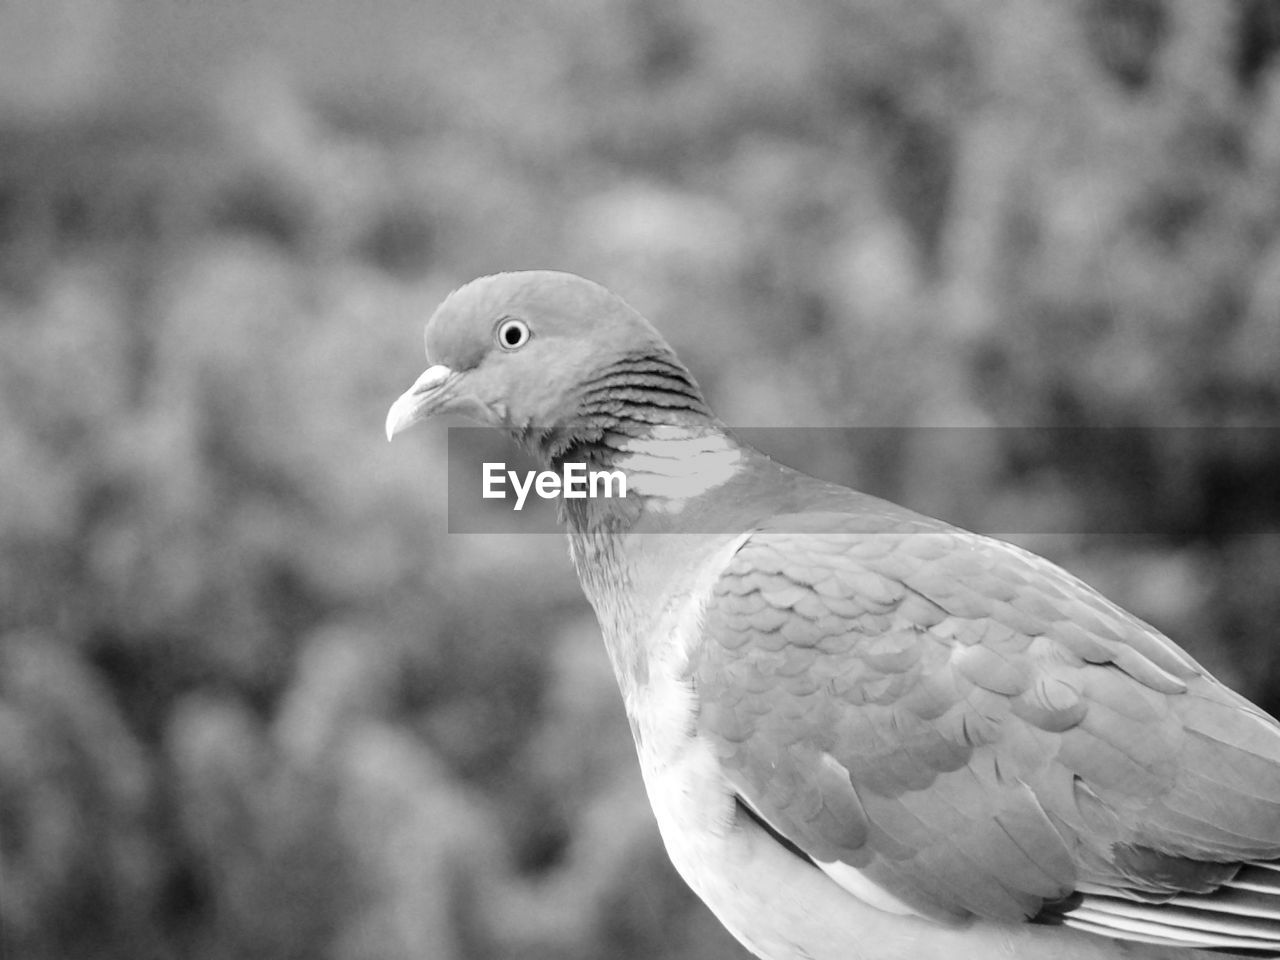 animal themes, animal, bird, animal wildlife, one animal, stock dove, wildlife, pigeons and doves, beak, close-up, dove - bird, black and white, nature, focus on foreground, wing, monochrome, animal body part, no people, pigeon, white, outdoors, feather, mourning dove, day, monochrome photography